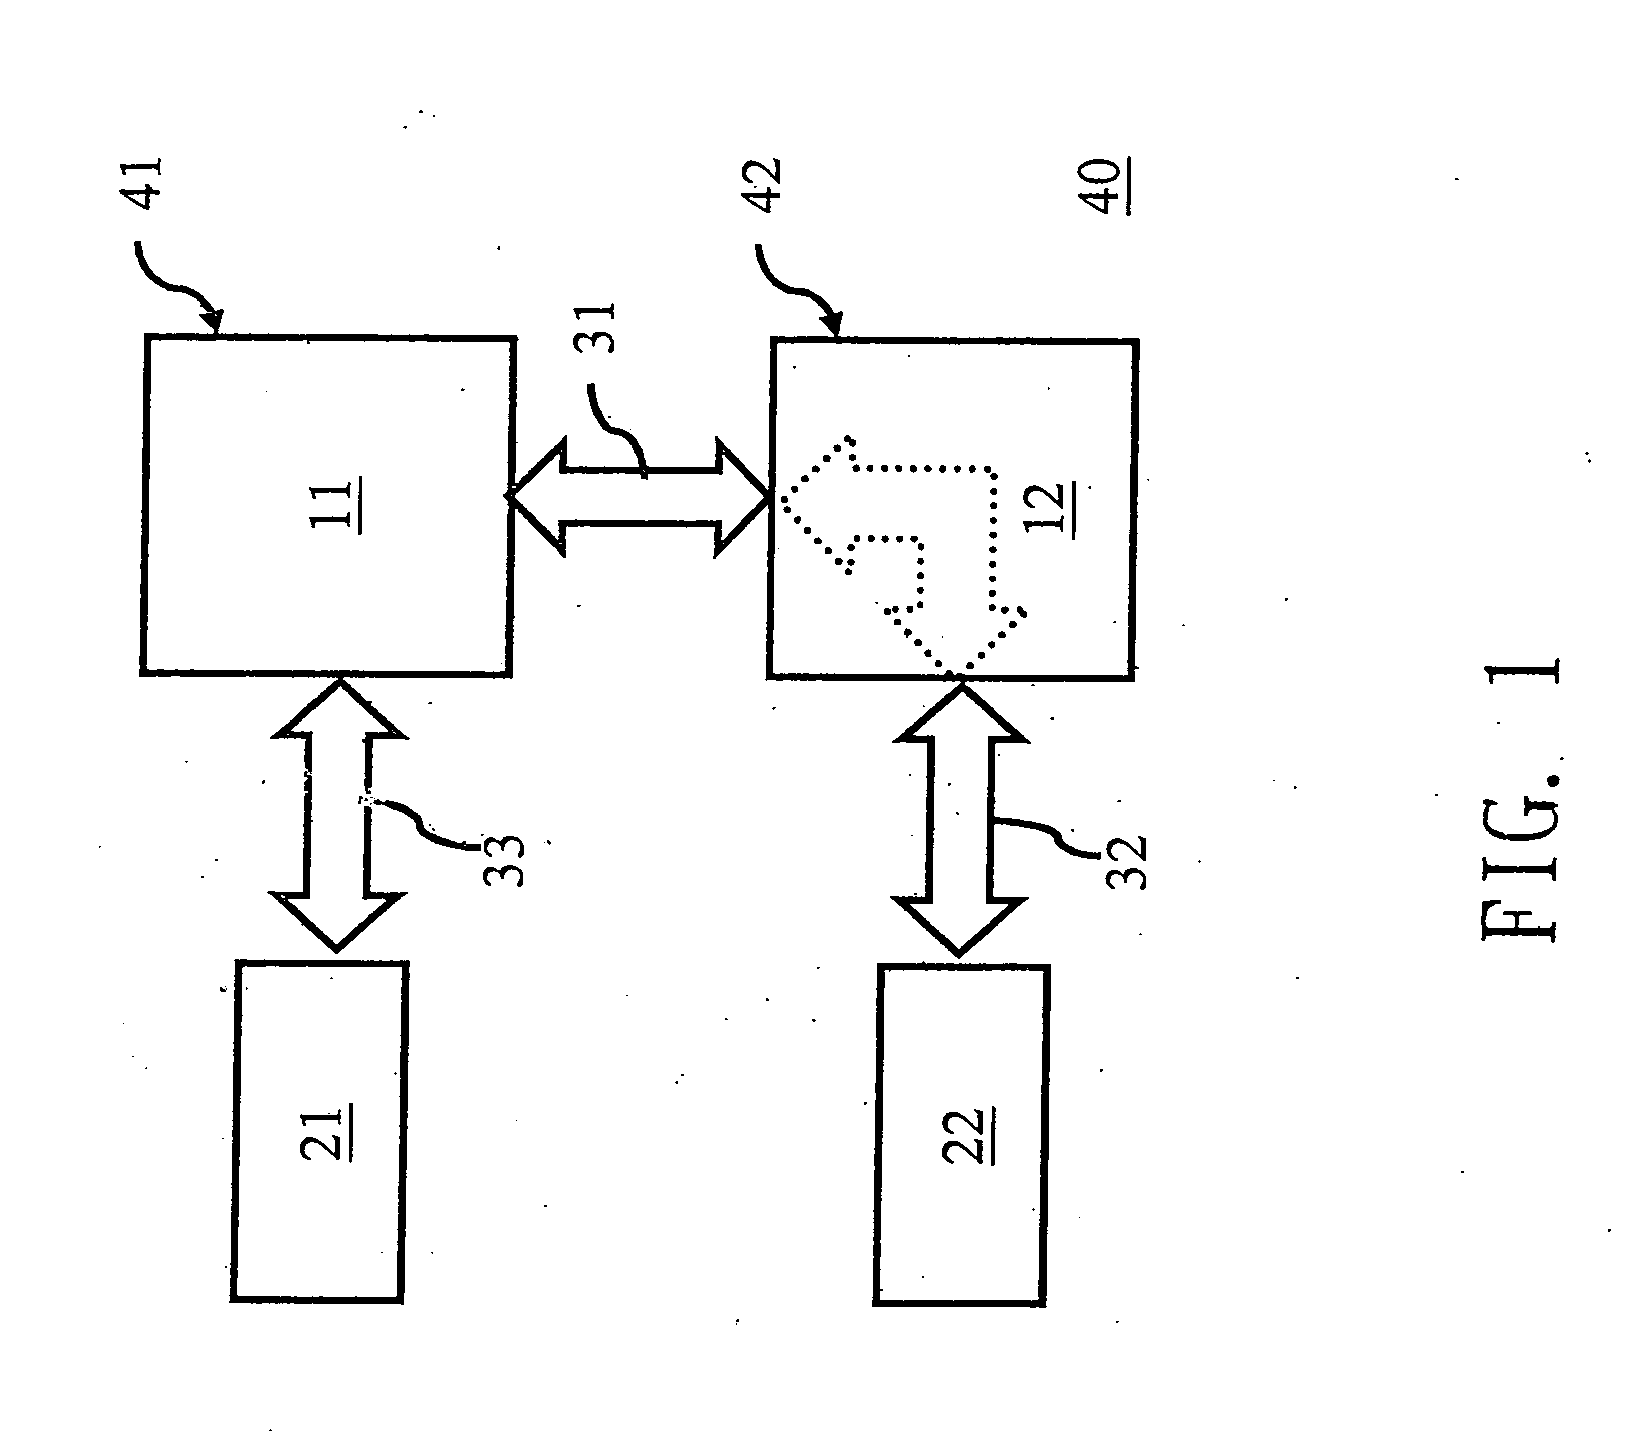 Bridge, computer system and method for initialization